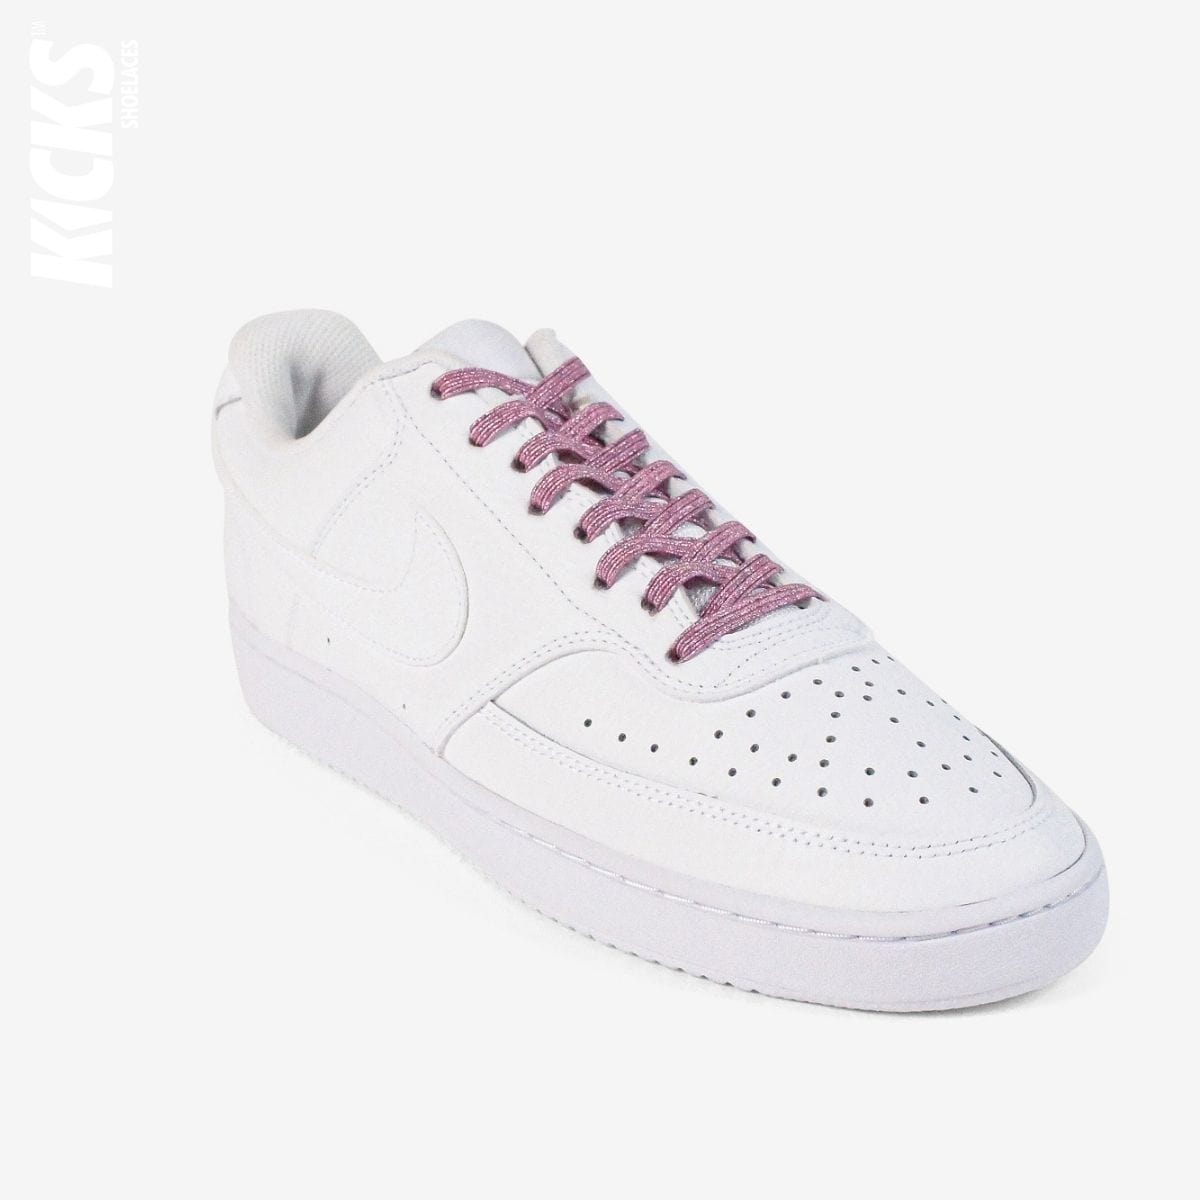 elastic-no-tie-shoelaces-with-pink-laces-on-nike-white-sneakers